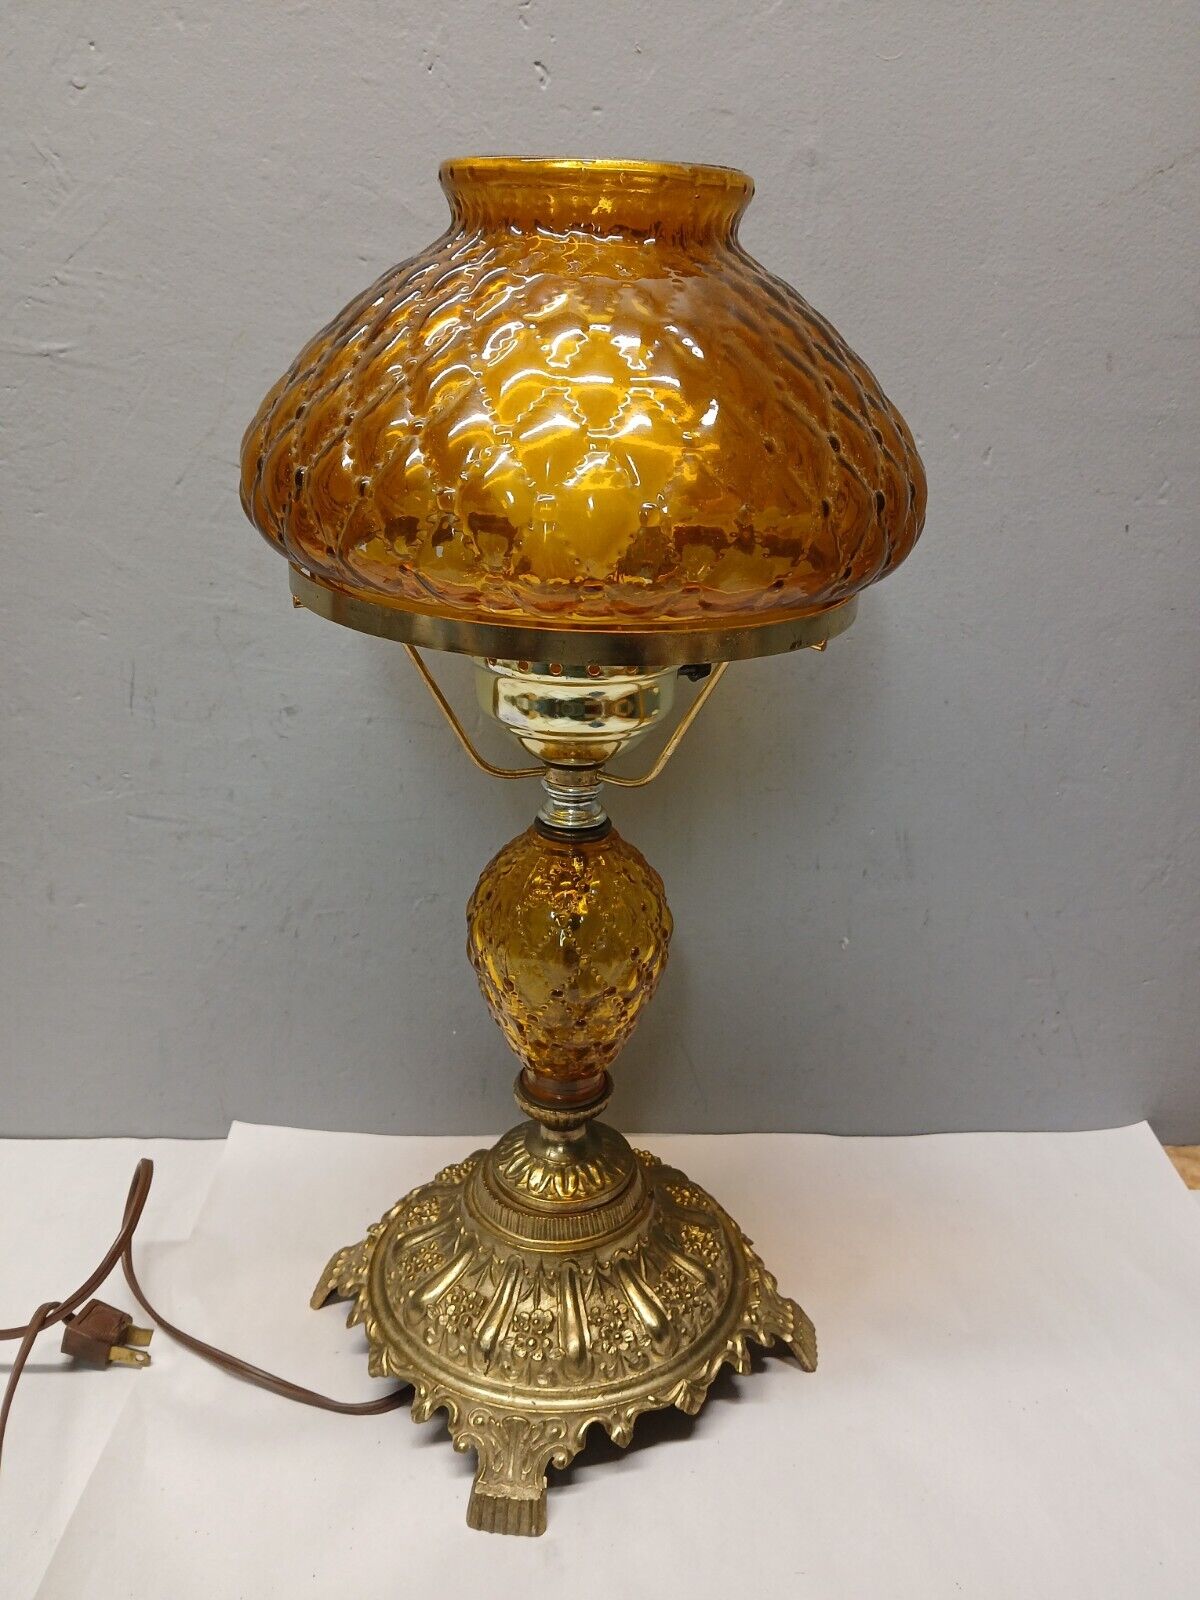 Vintage Hurricane Table Lamp Amber Quilted Glass Shade L+L WMC #6602